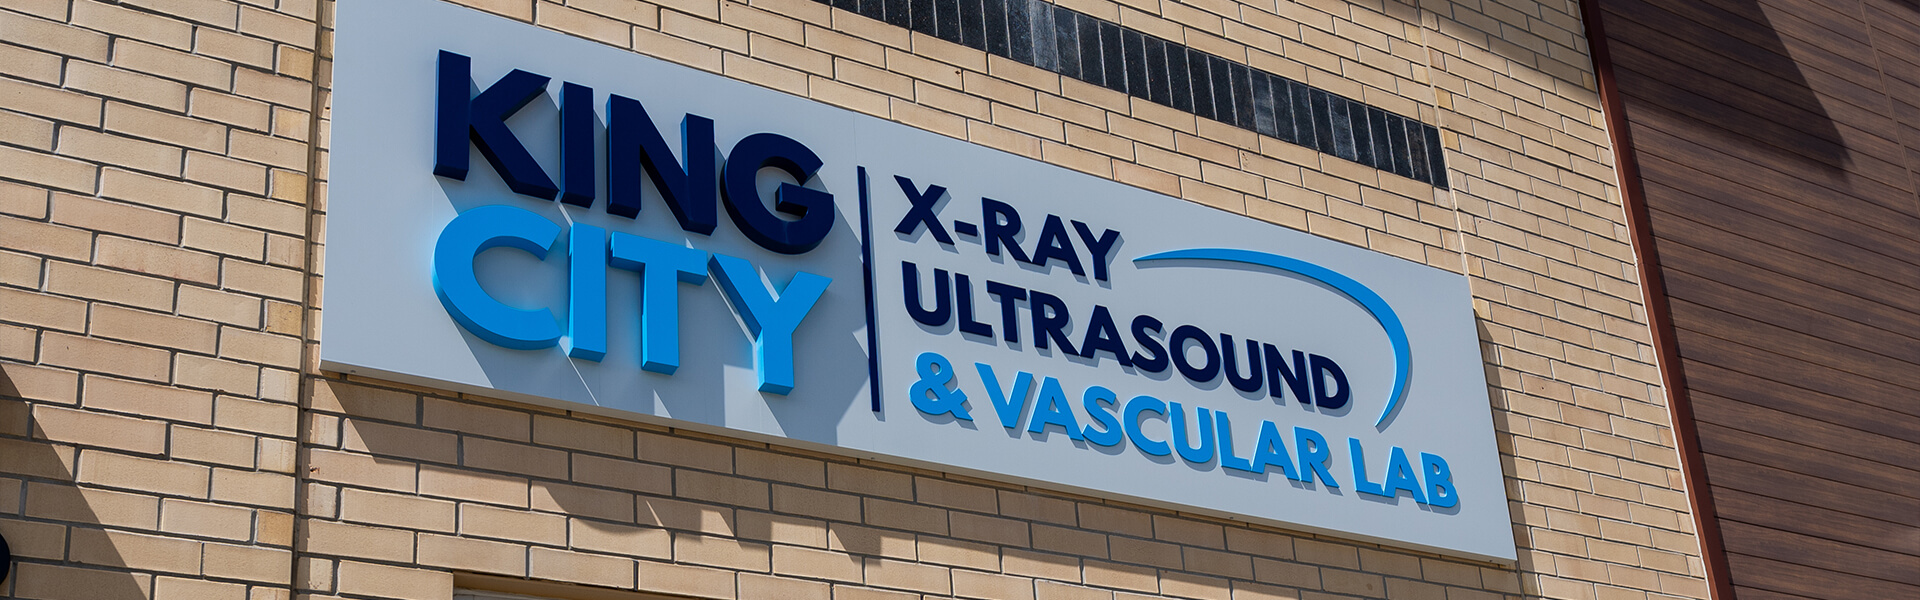 King City X-RAY - Exterior - Banner